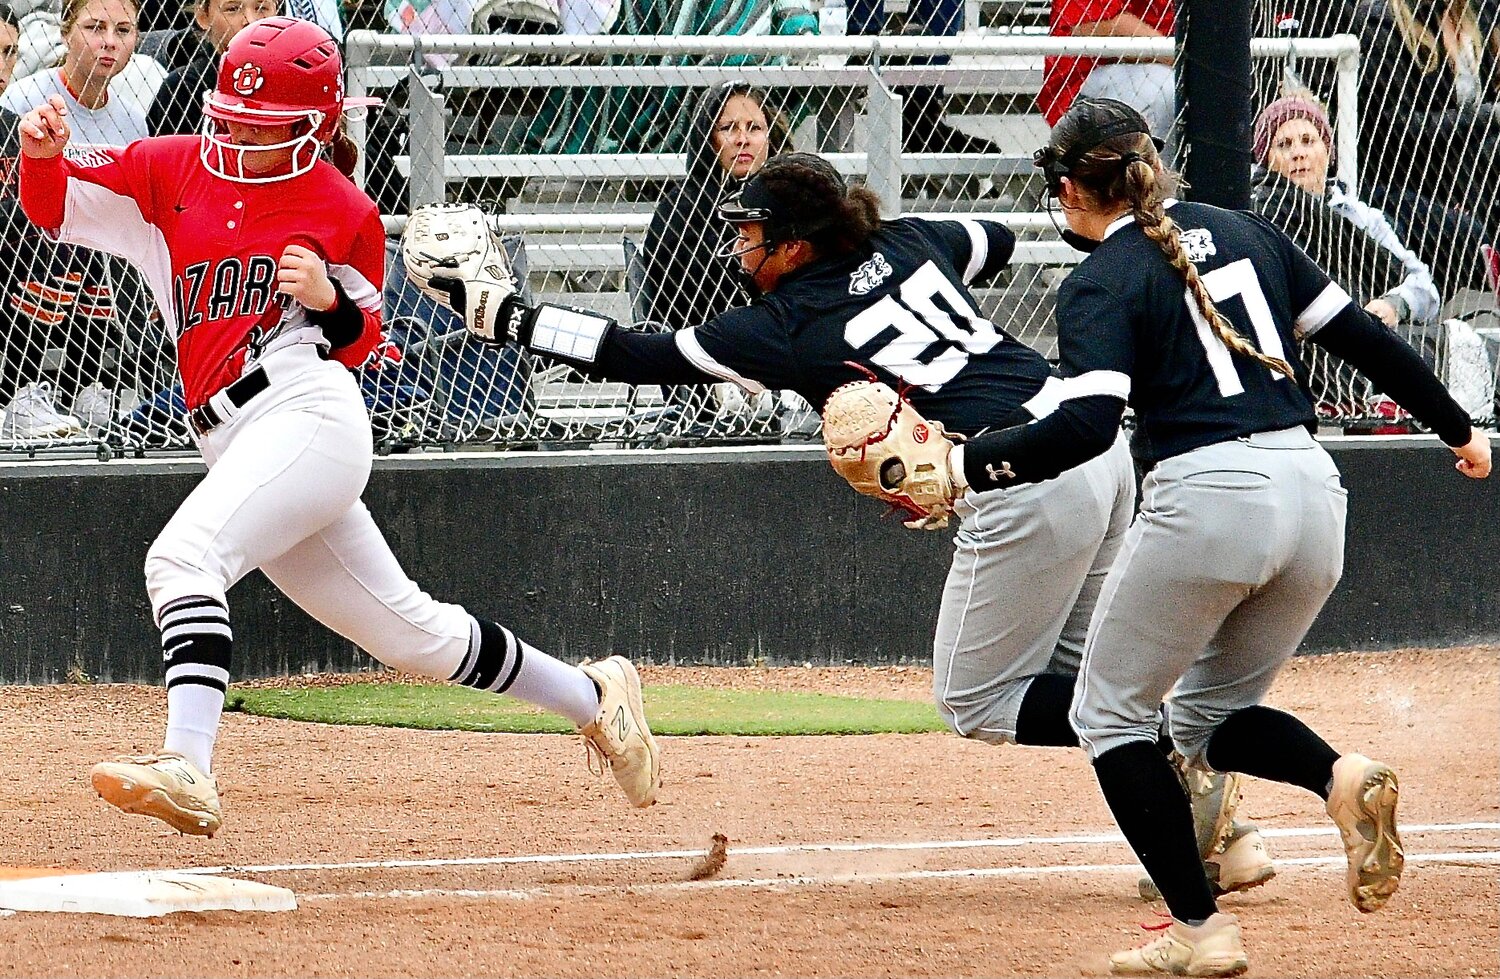 OZARK'S NATALIE MORGAN eludes a tag on her way to an infield single.